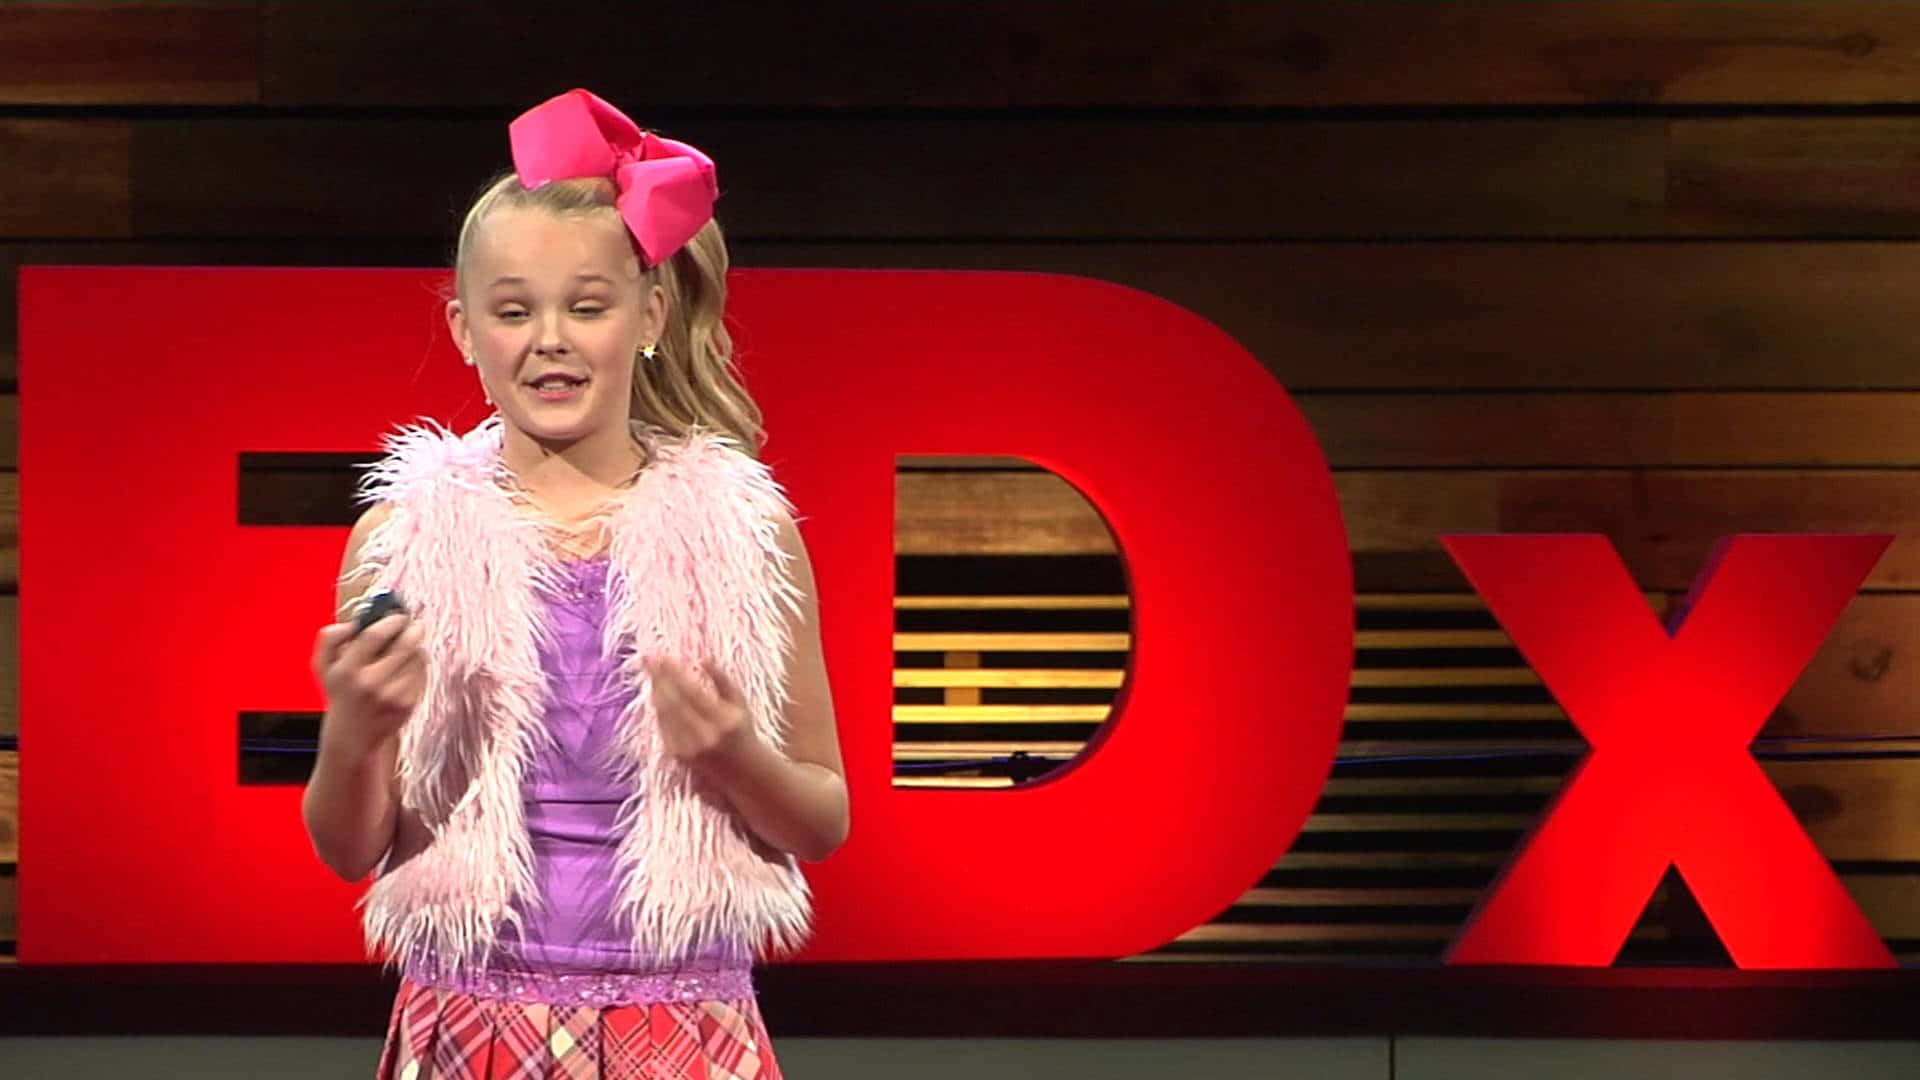 Jojo Siwa rocks out on stage with her signature dad hat and rainbow colored bow!